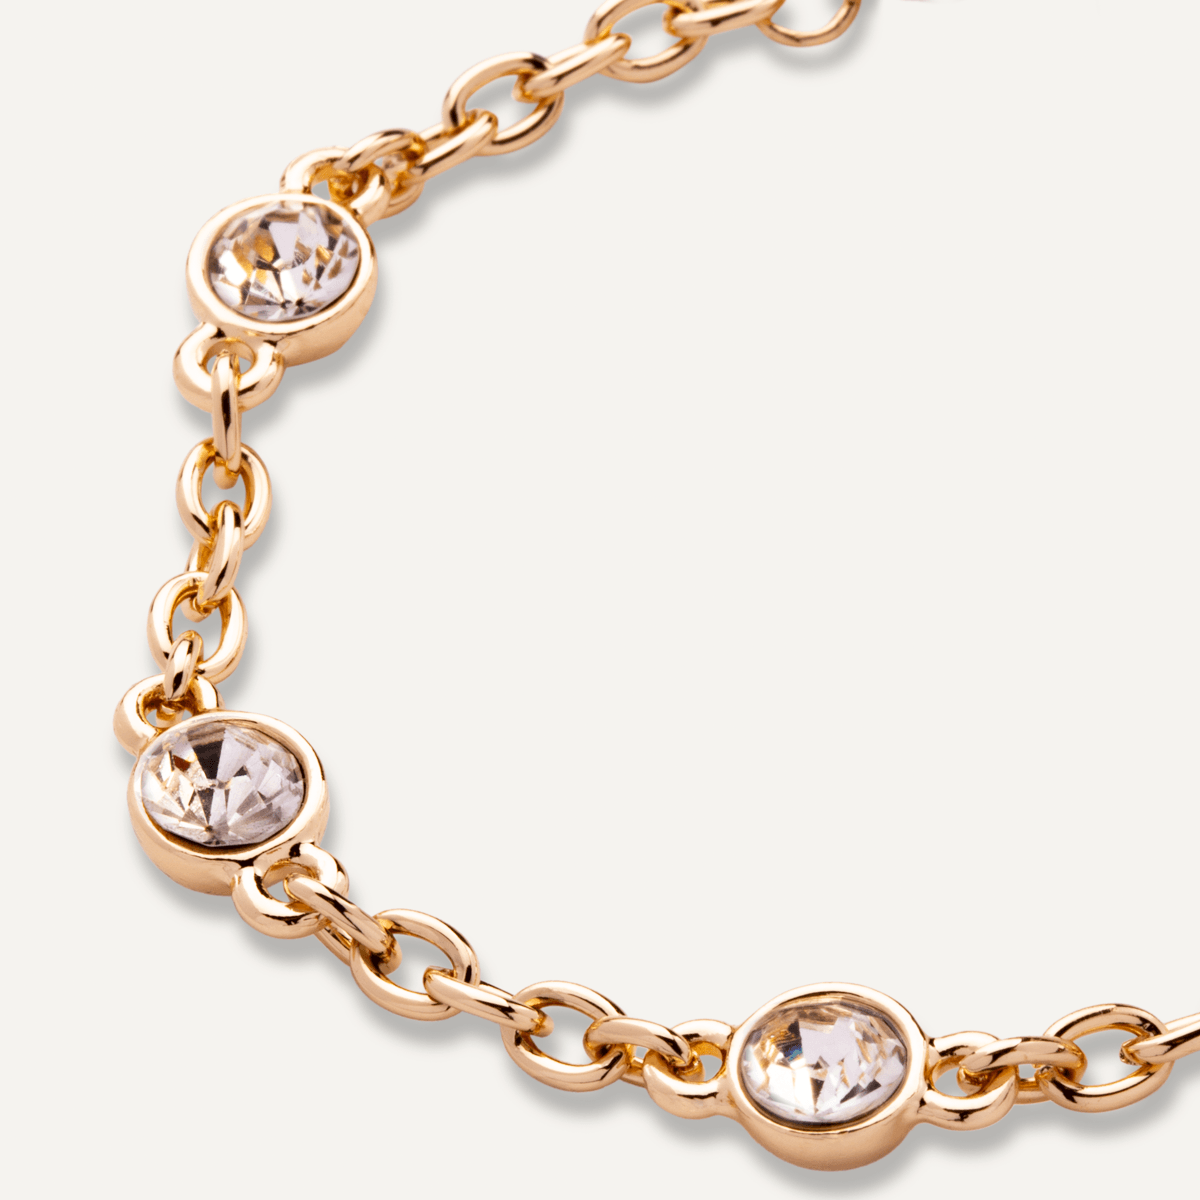 Close-up view of Alesha Contemporary Gold Crystal Bracelet